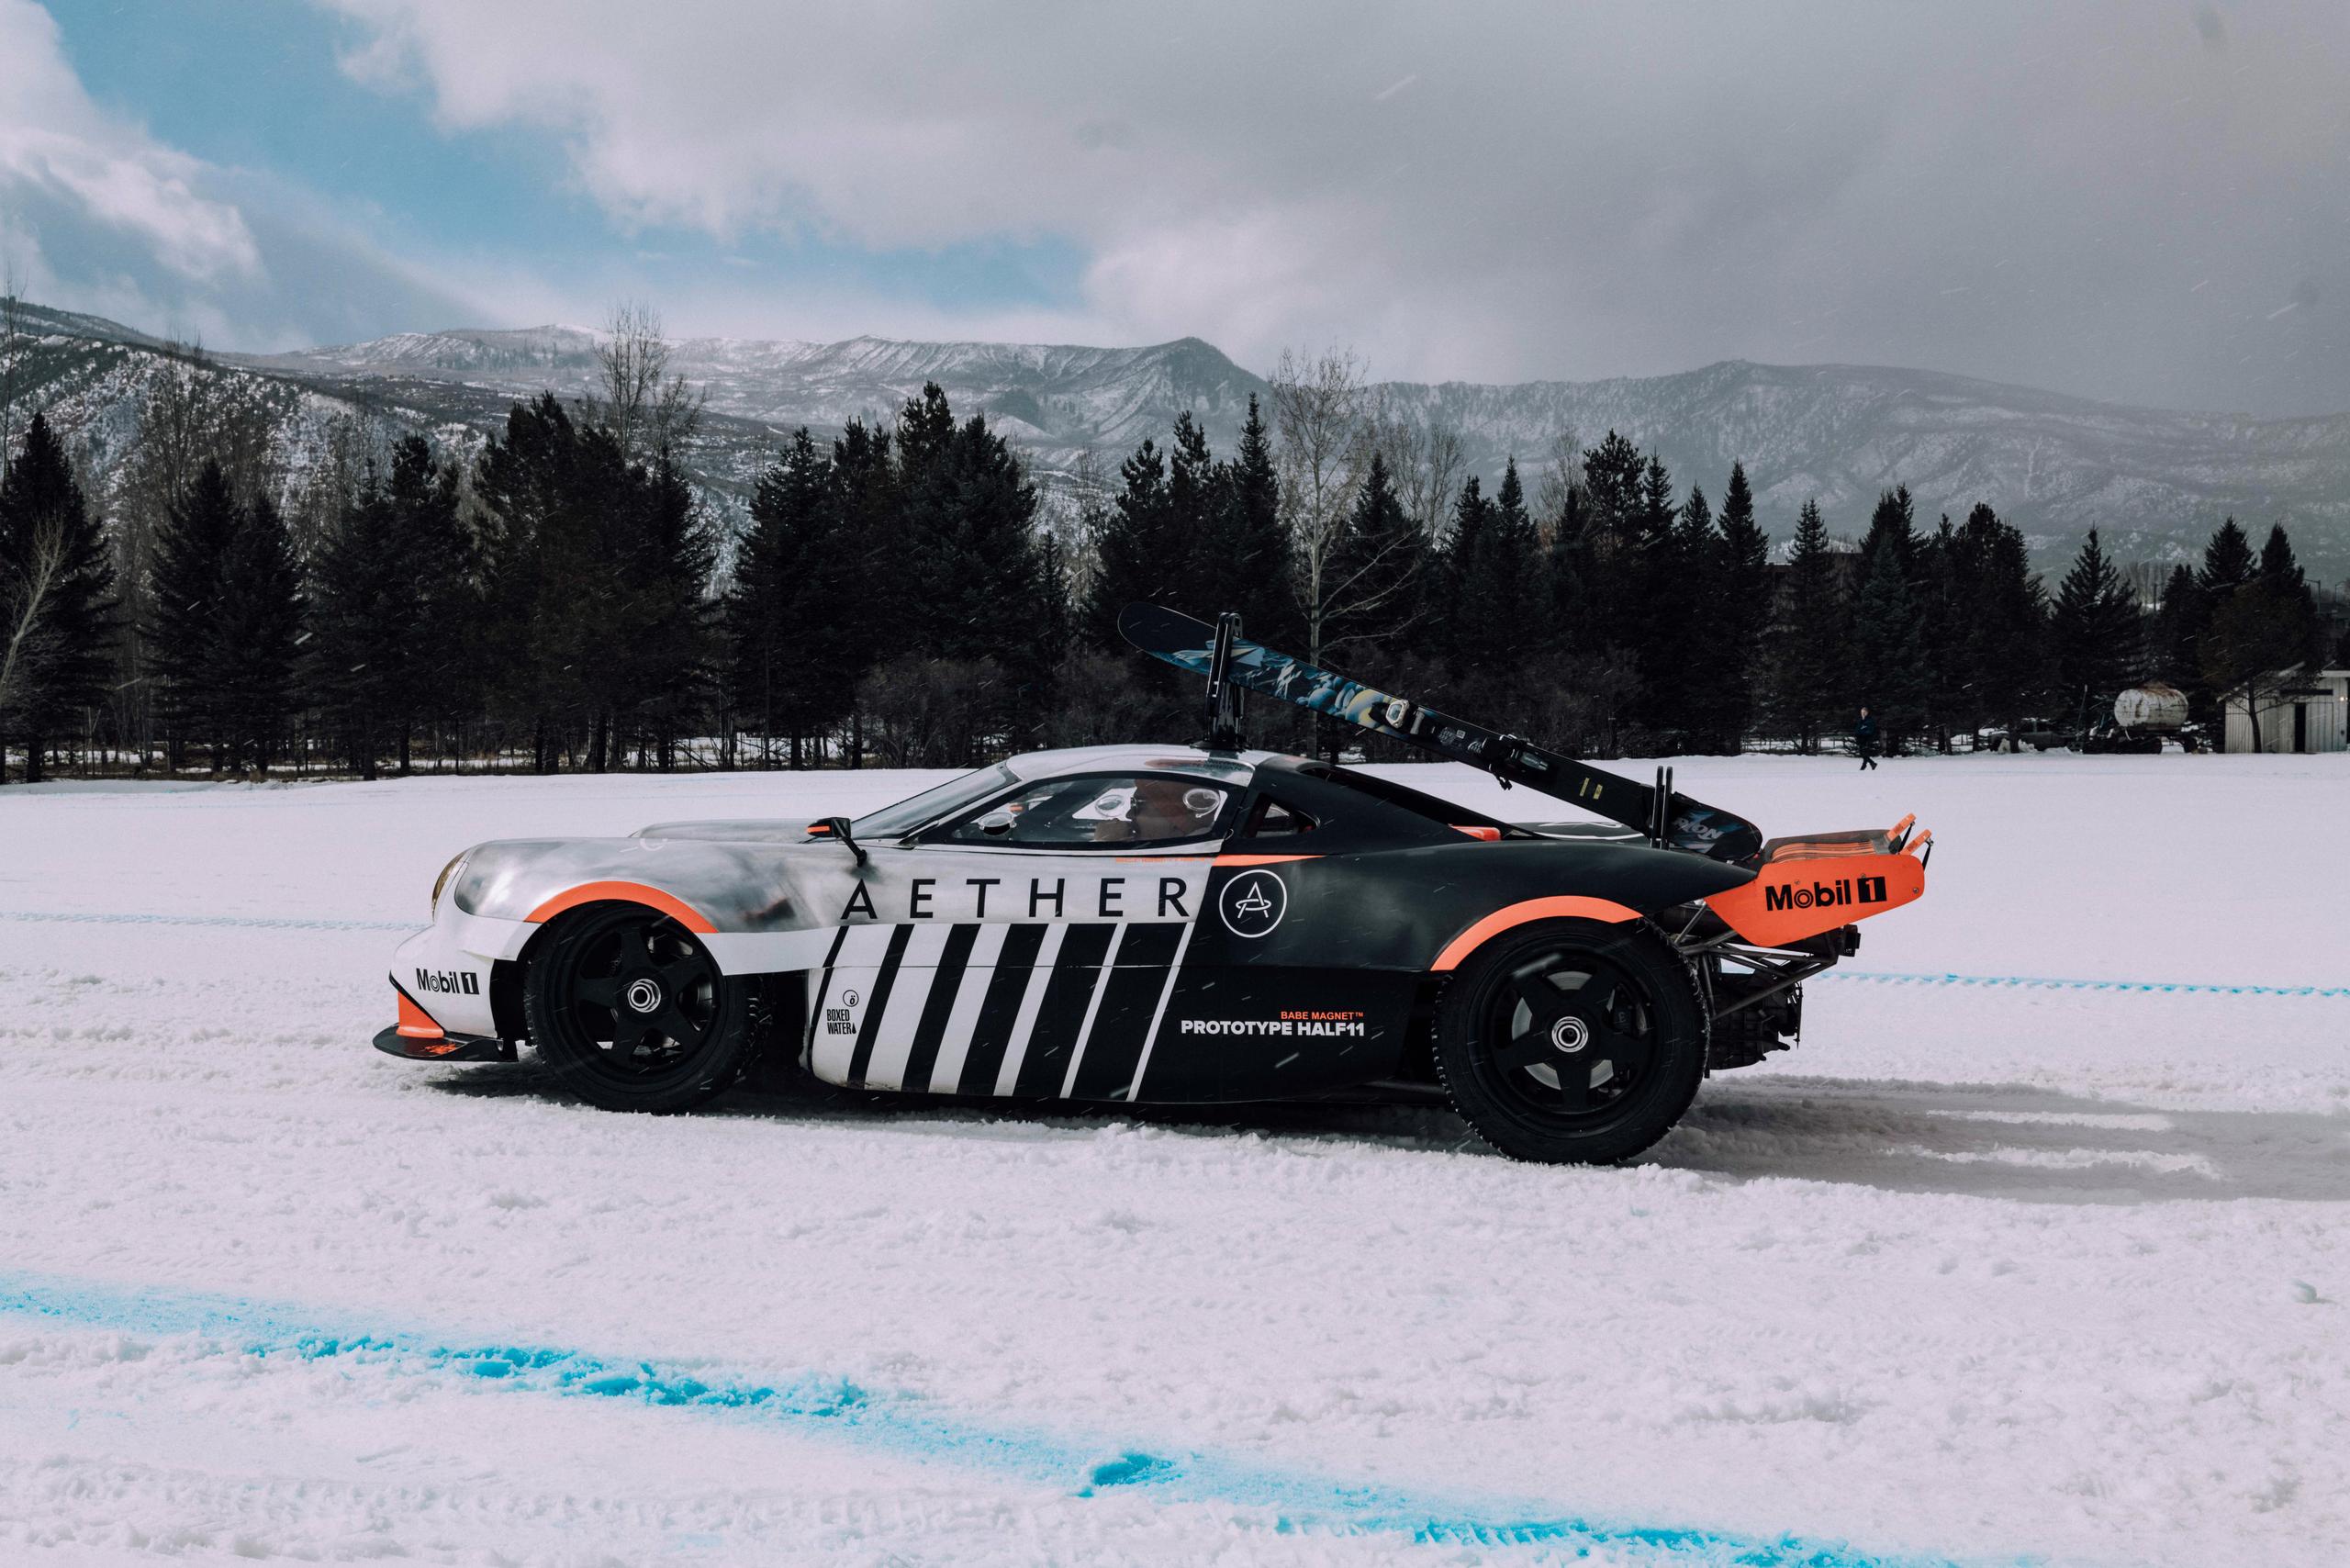 Profile view of Half11 prototype on ice race with the Rocky mountains in the background